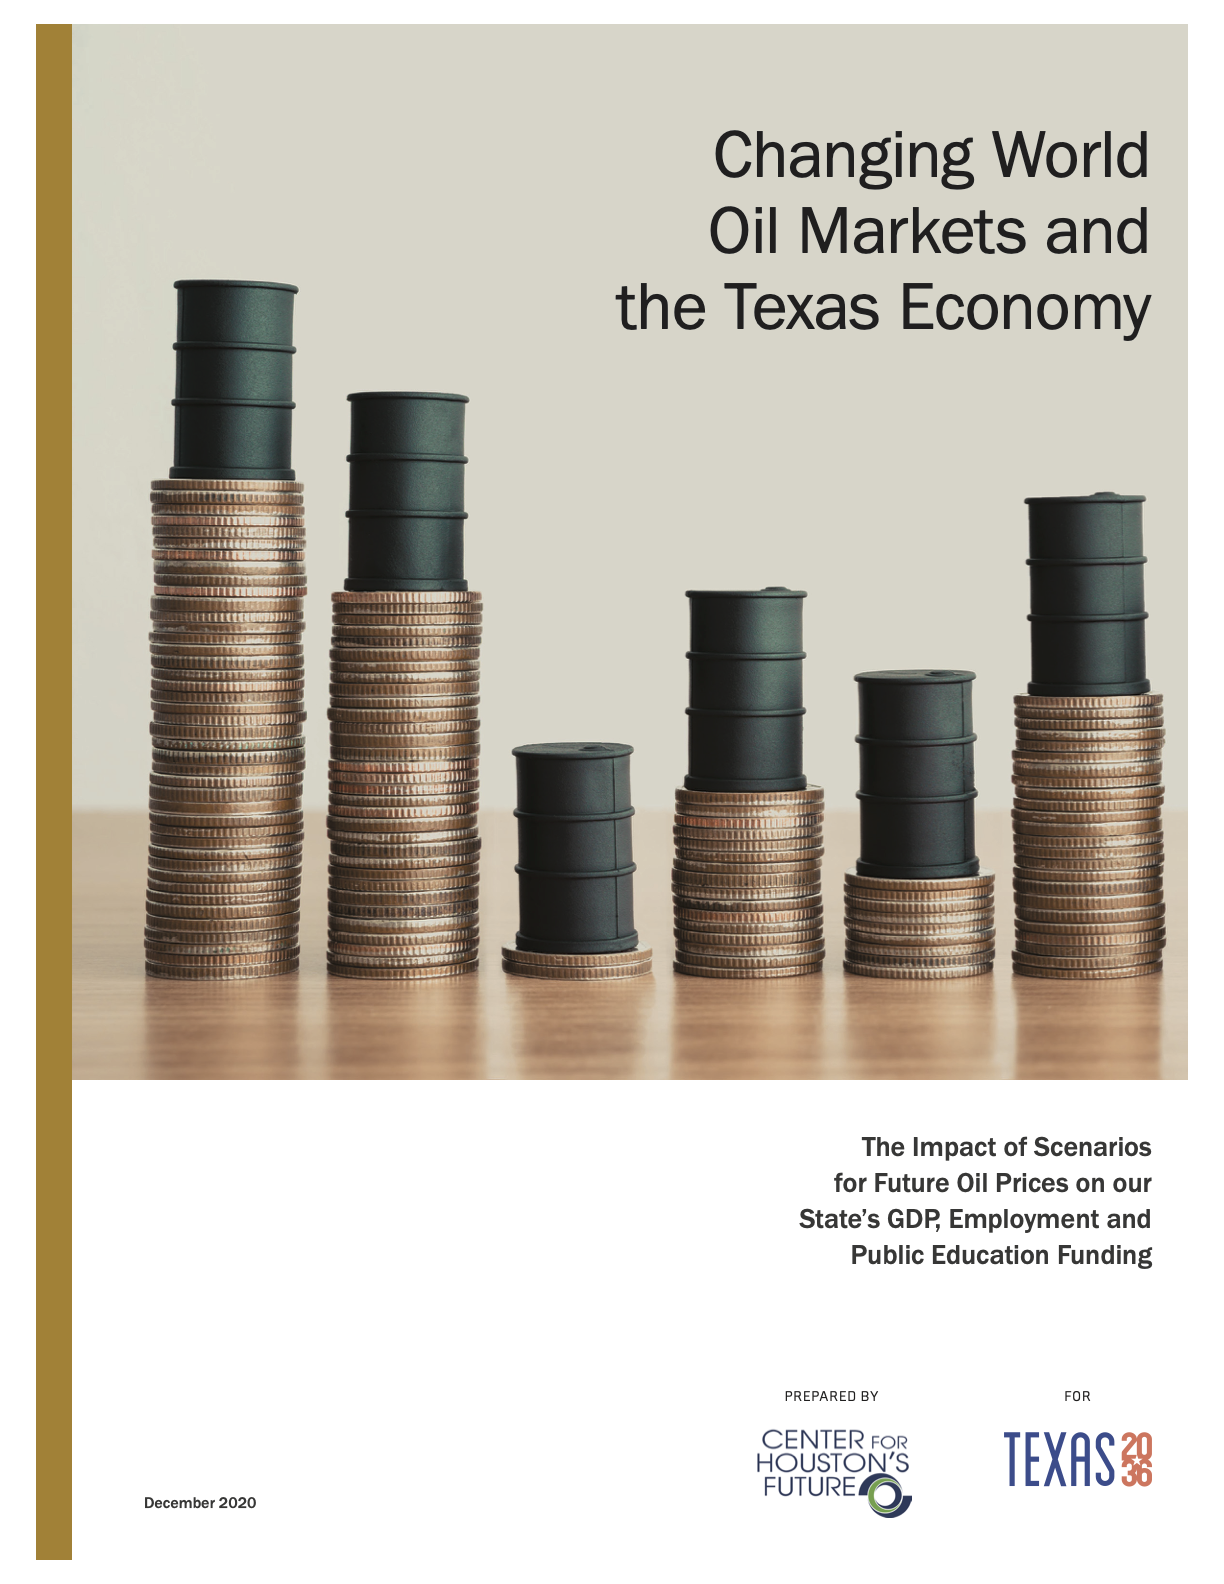 Changing World Oil Markets and the Texas Economy